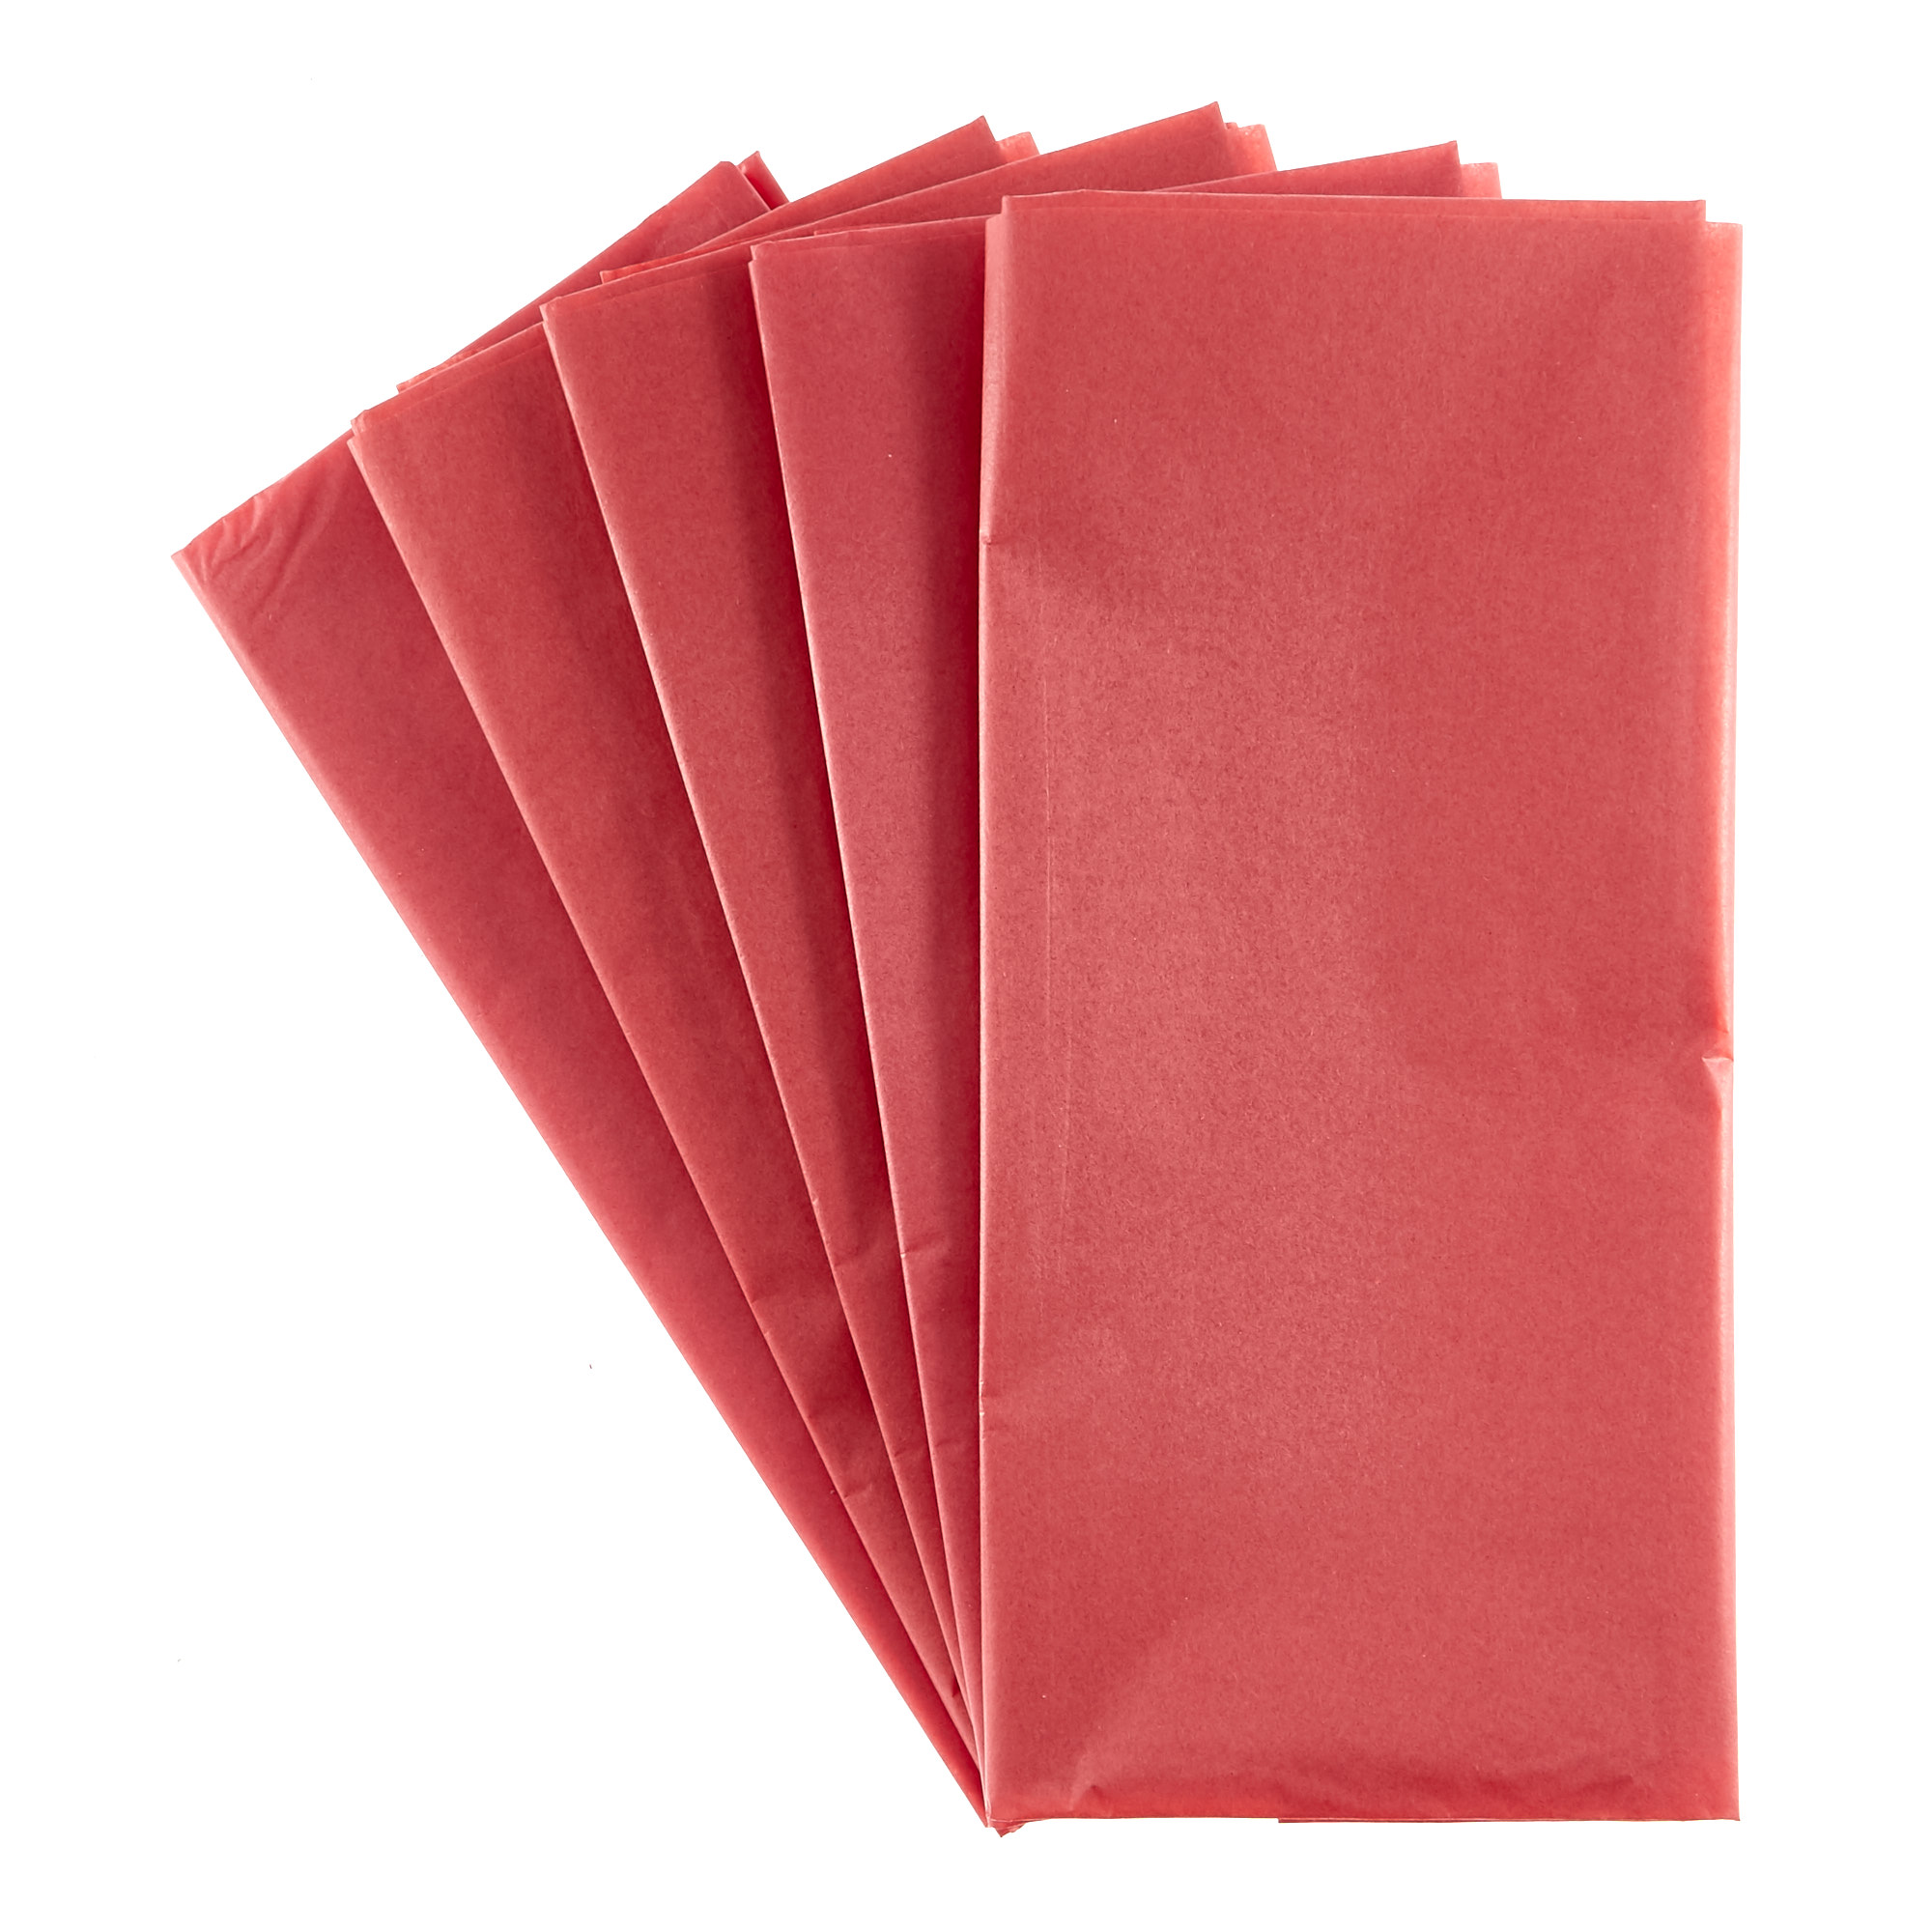 Red Tissue Paper - 10 Sheets 